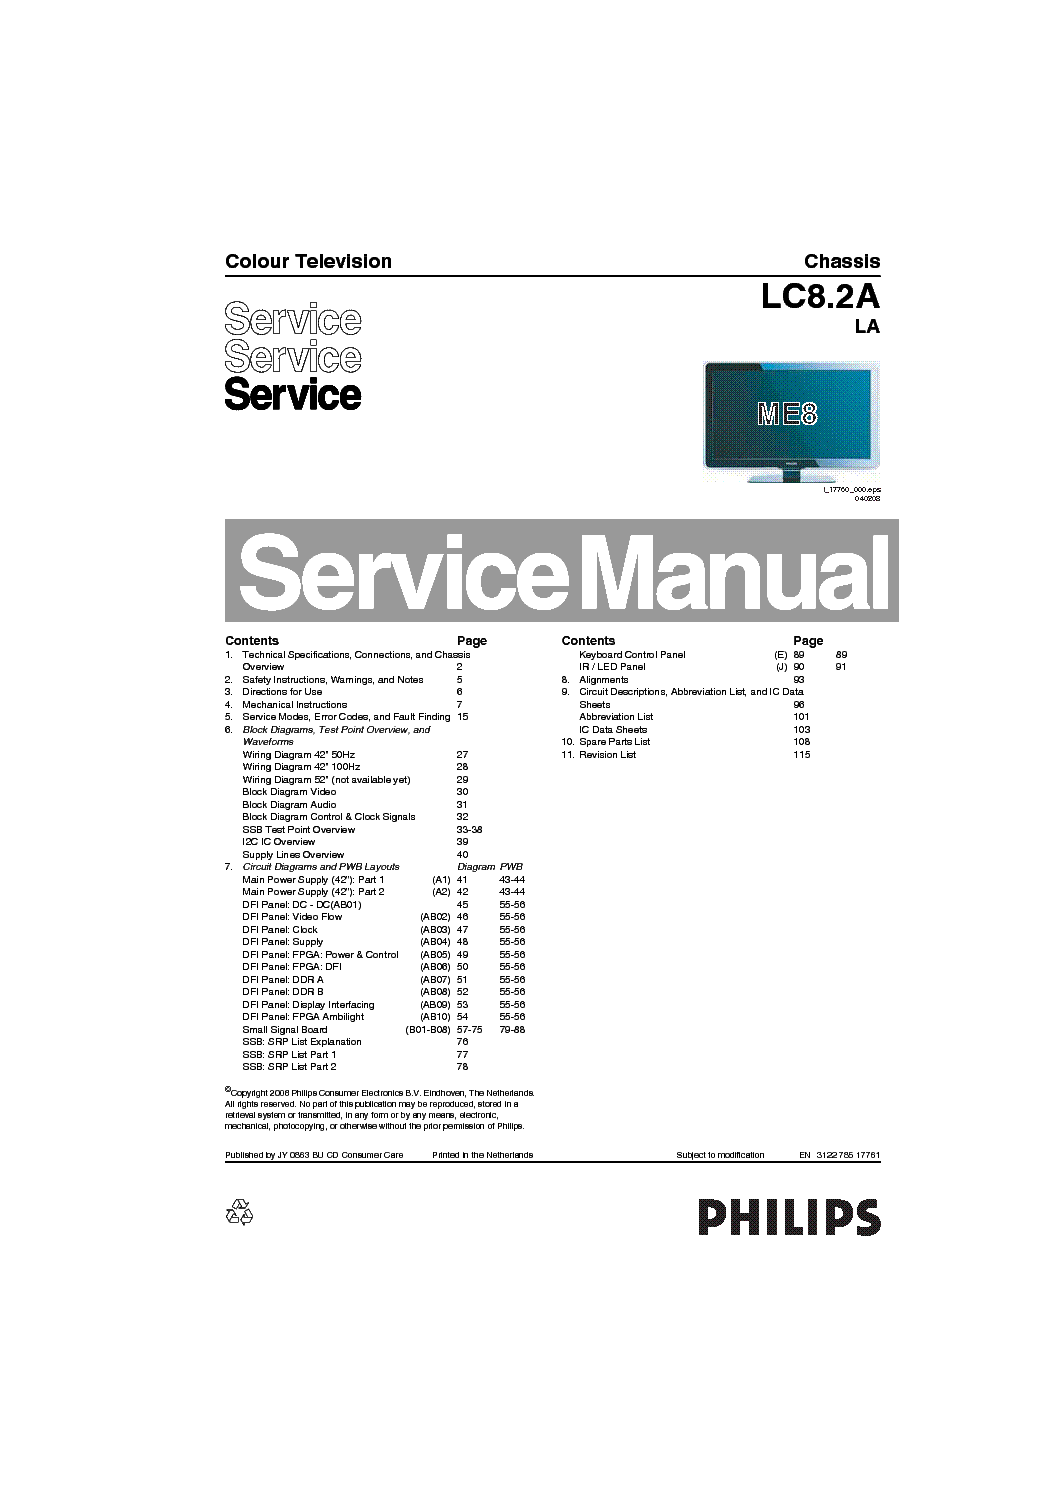 PHILIPS 32PFL5403 CHASSIS LC8.2A LA service manual (1st page)